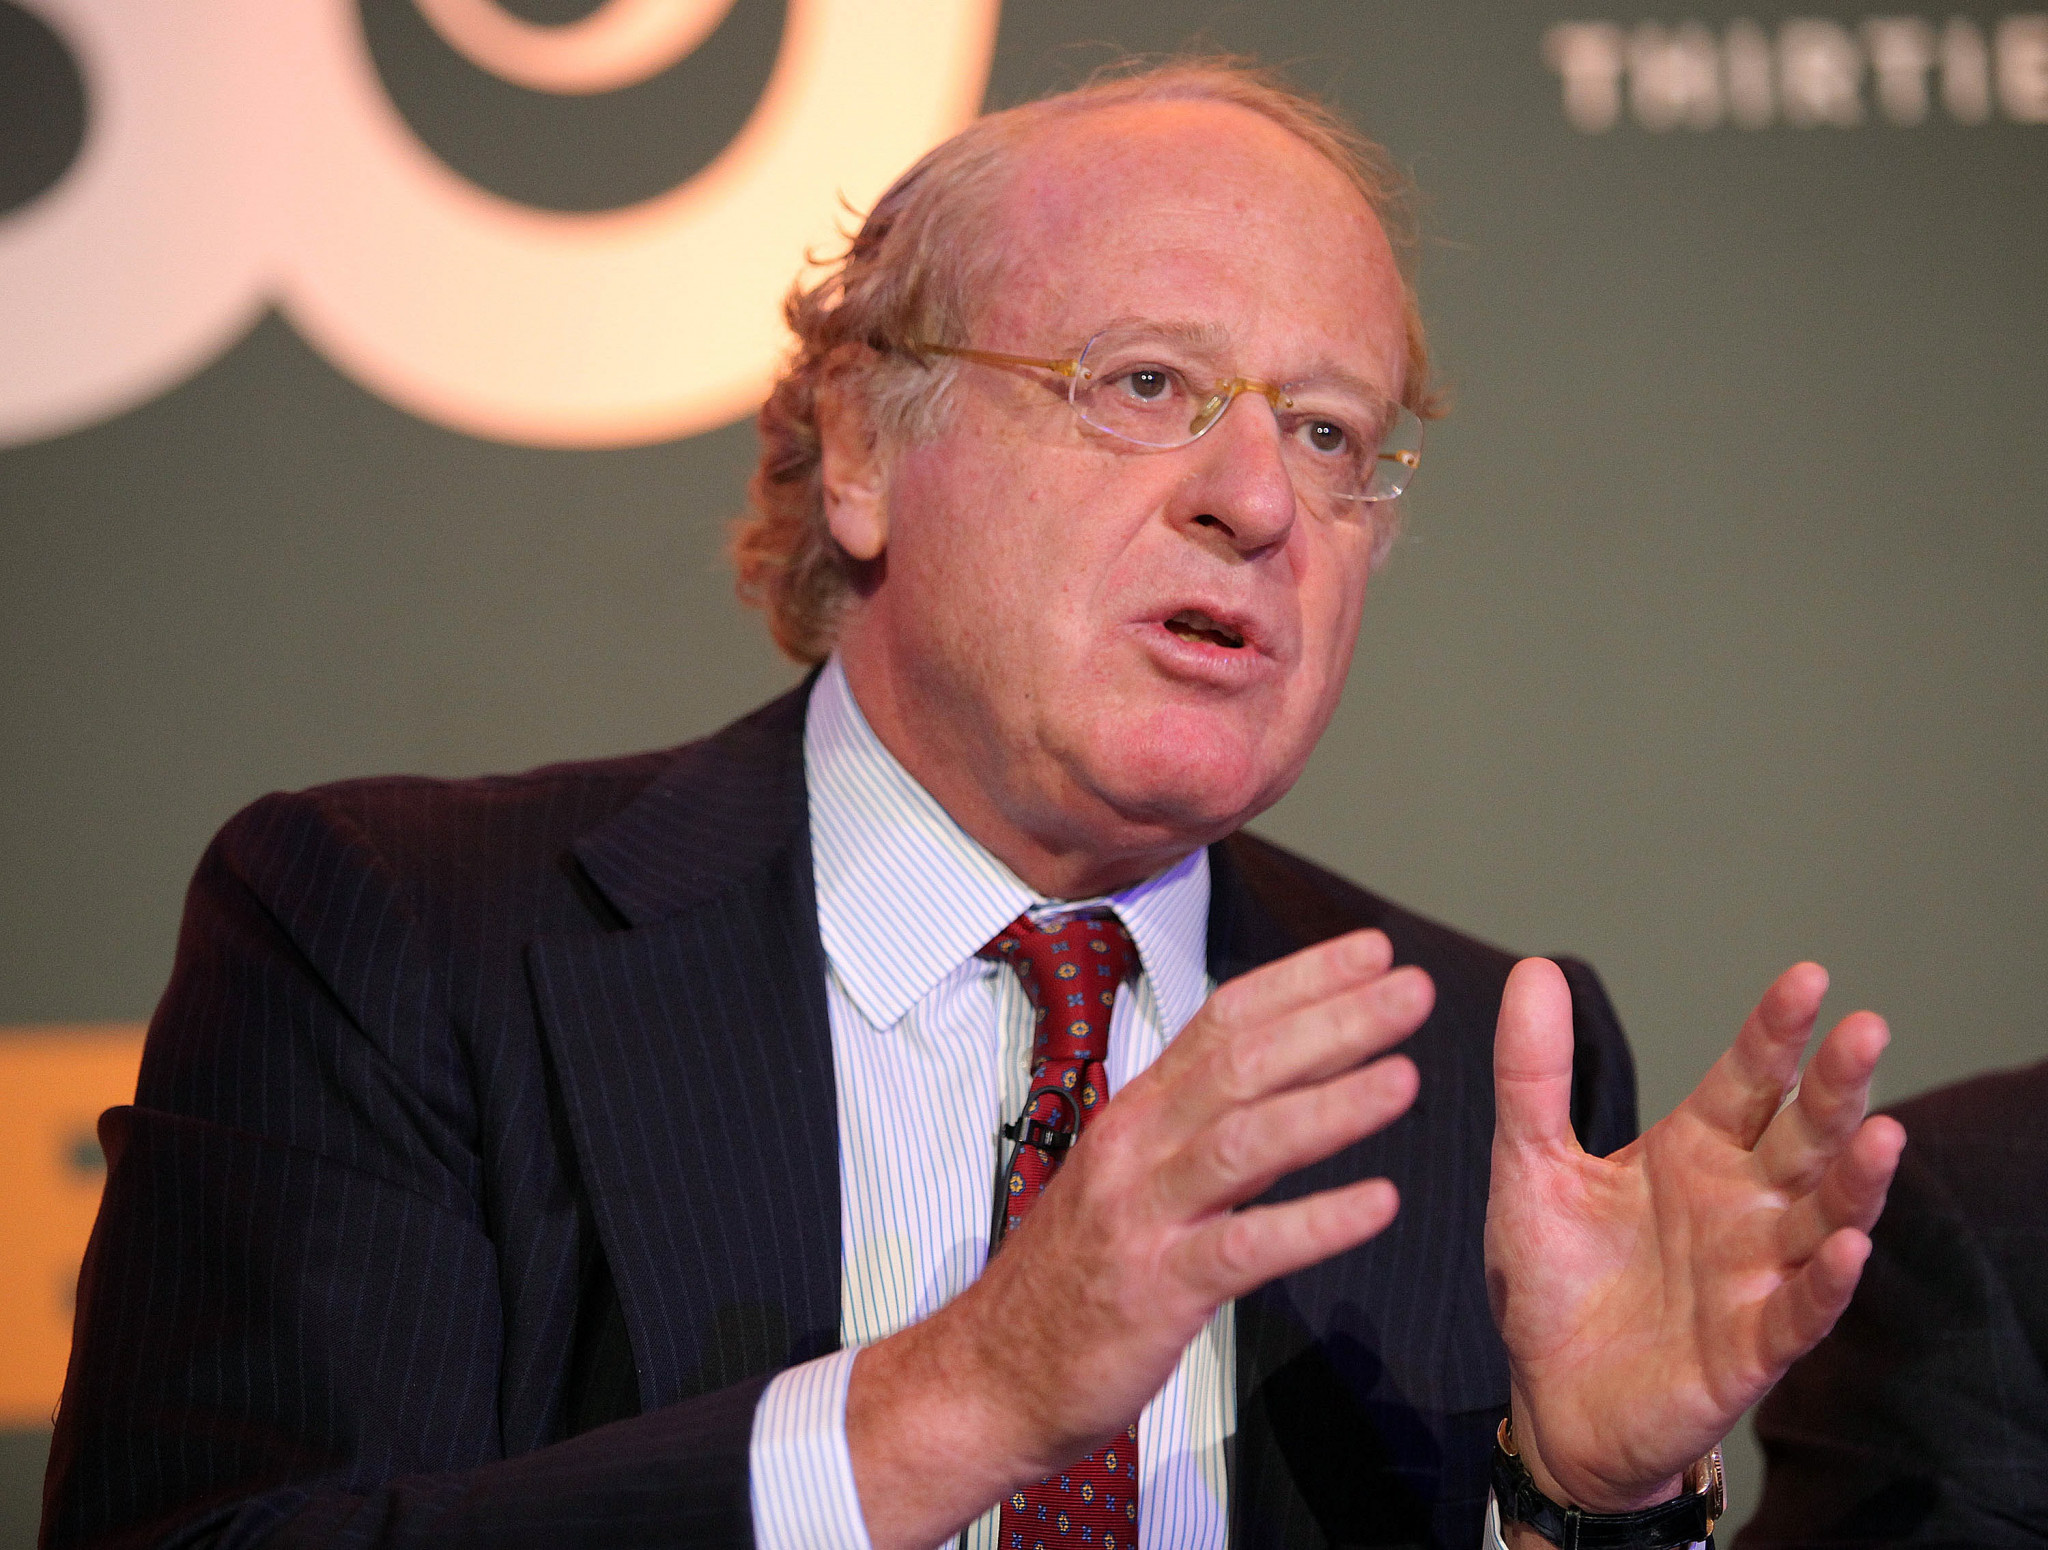 AC Milan President Paolo Scaroni had been considered a contender to become the new chief executive of Milan Cortina 2026 ©Getty Images